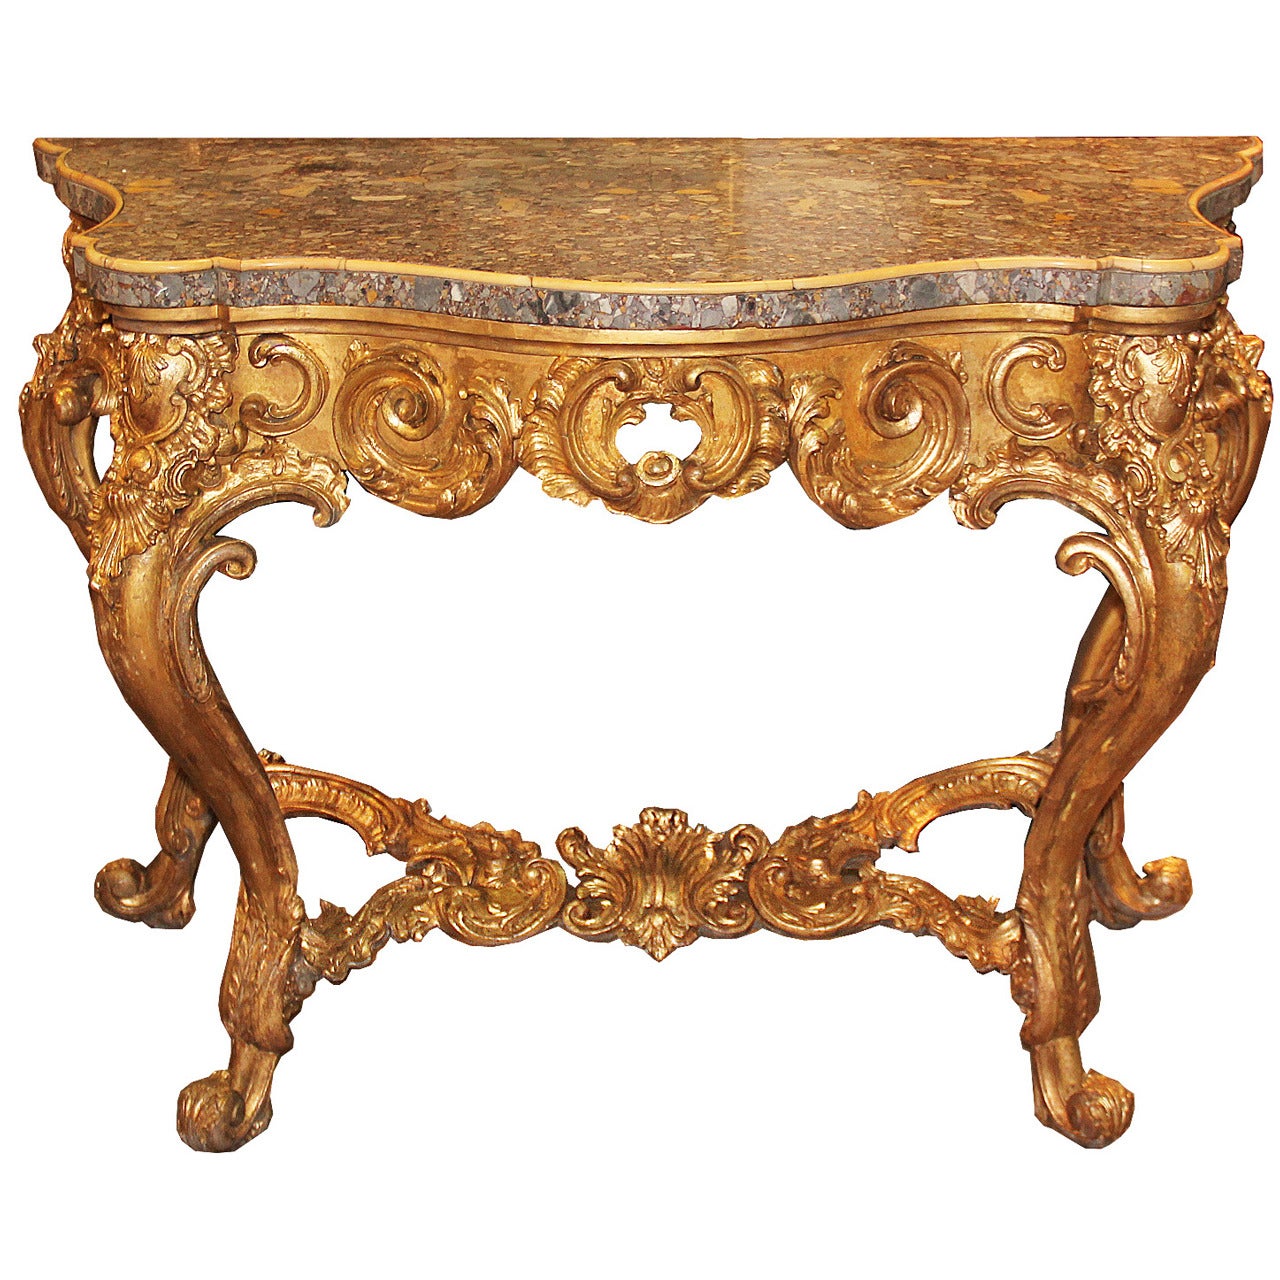 Striking Late 18th Century Italian Louis XV Giltwood Console Table For Sale